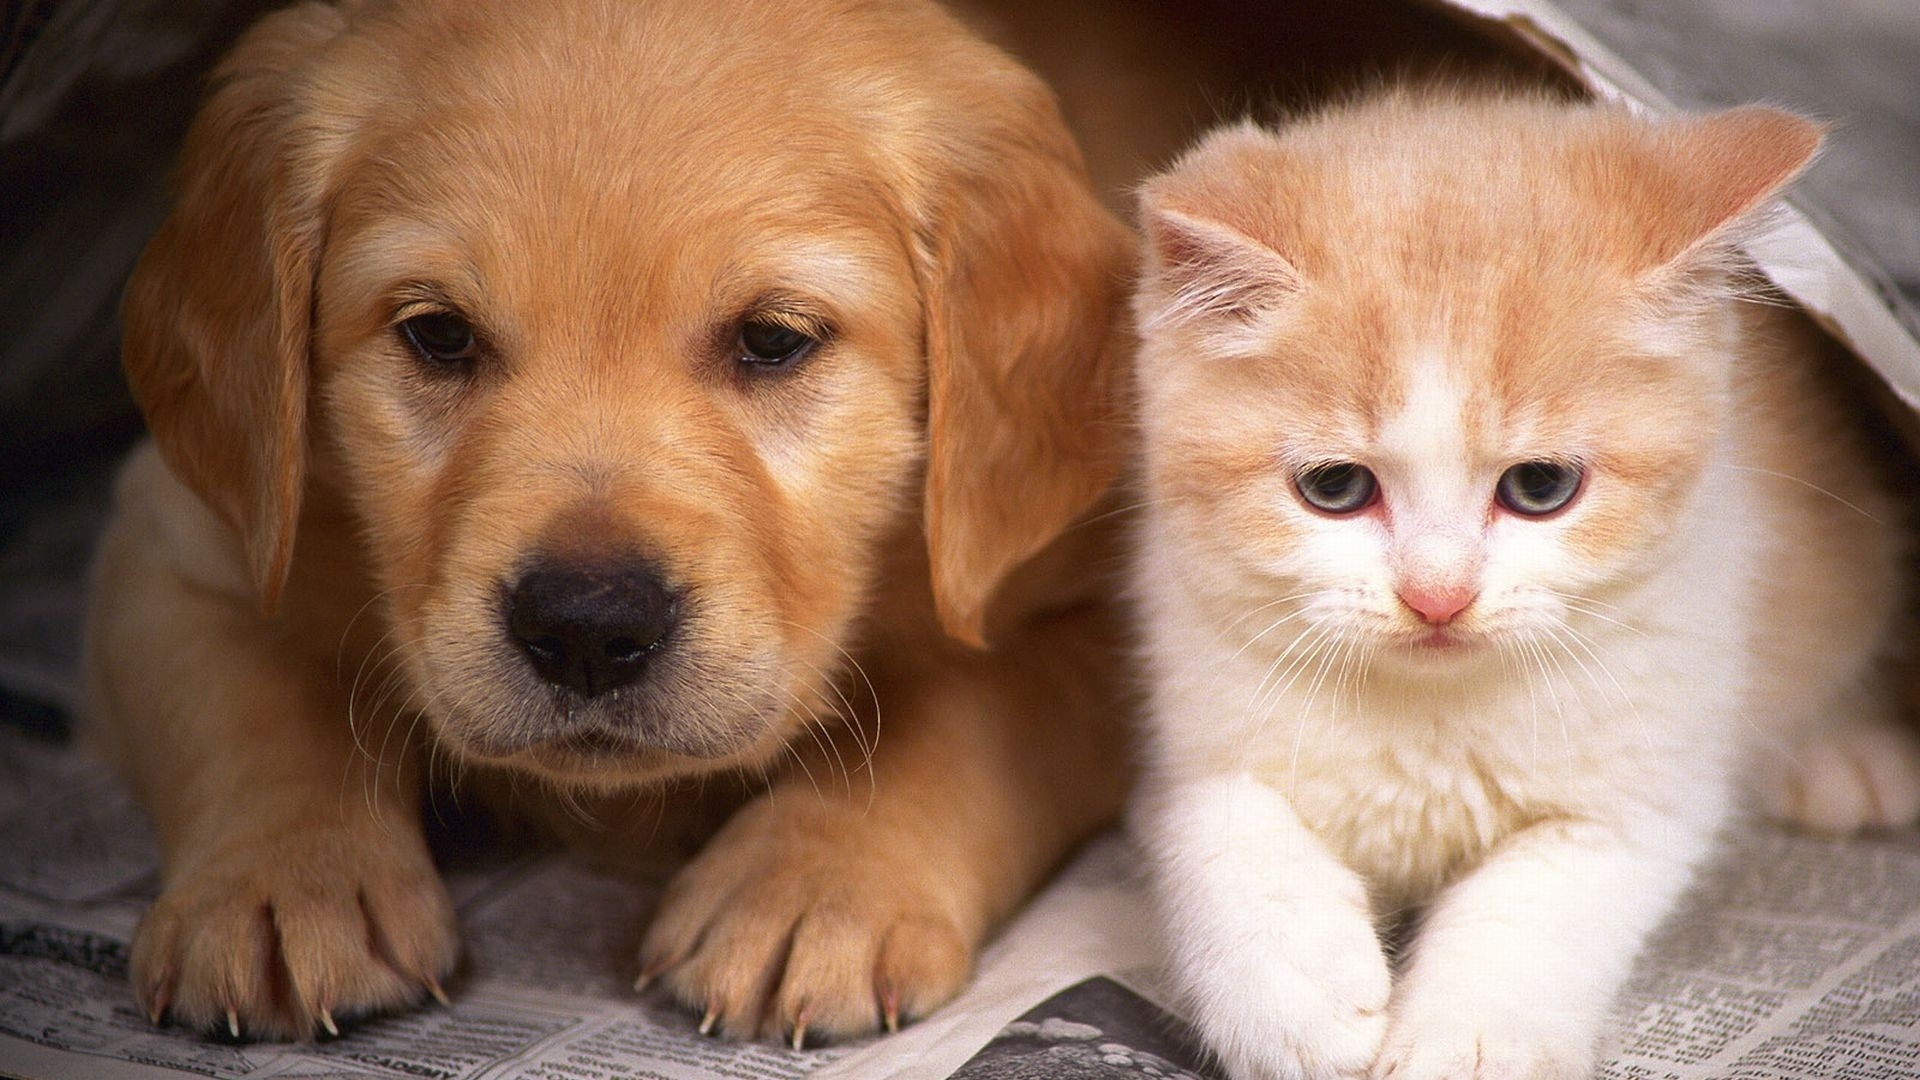 images of cat and dogs download